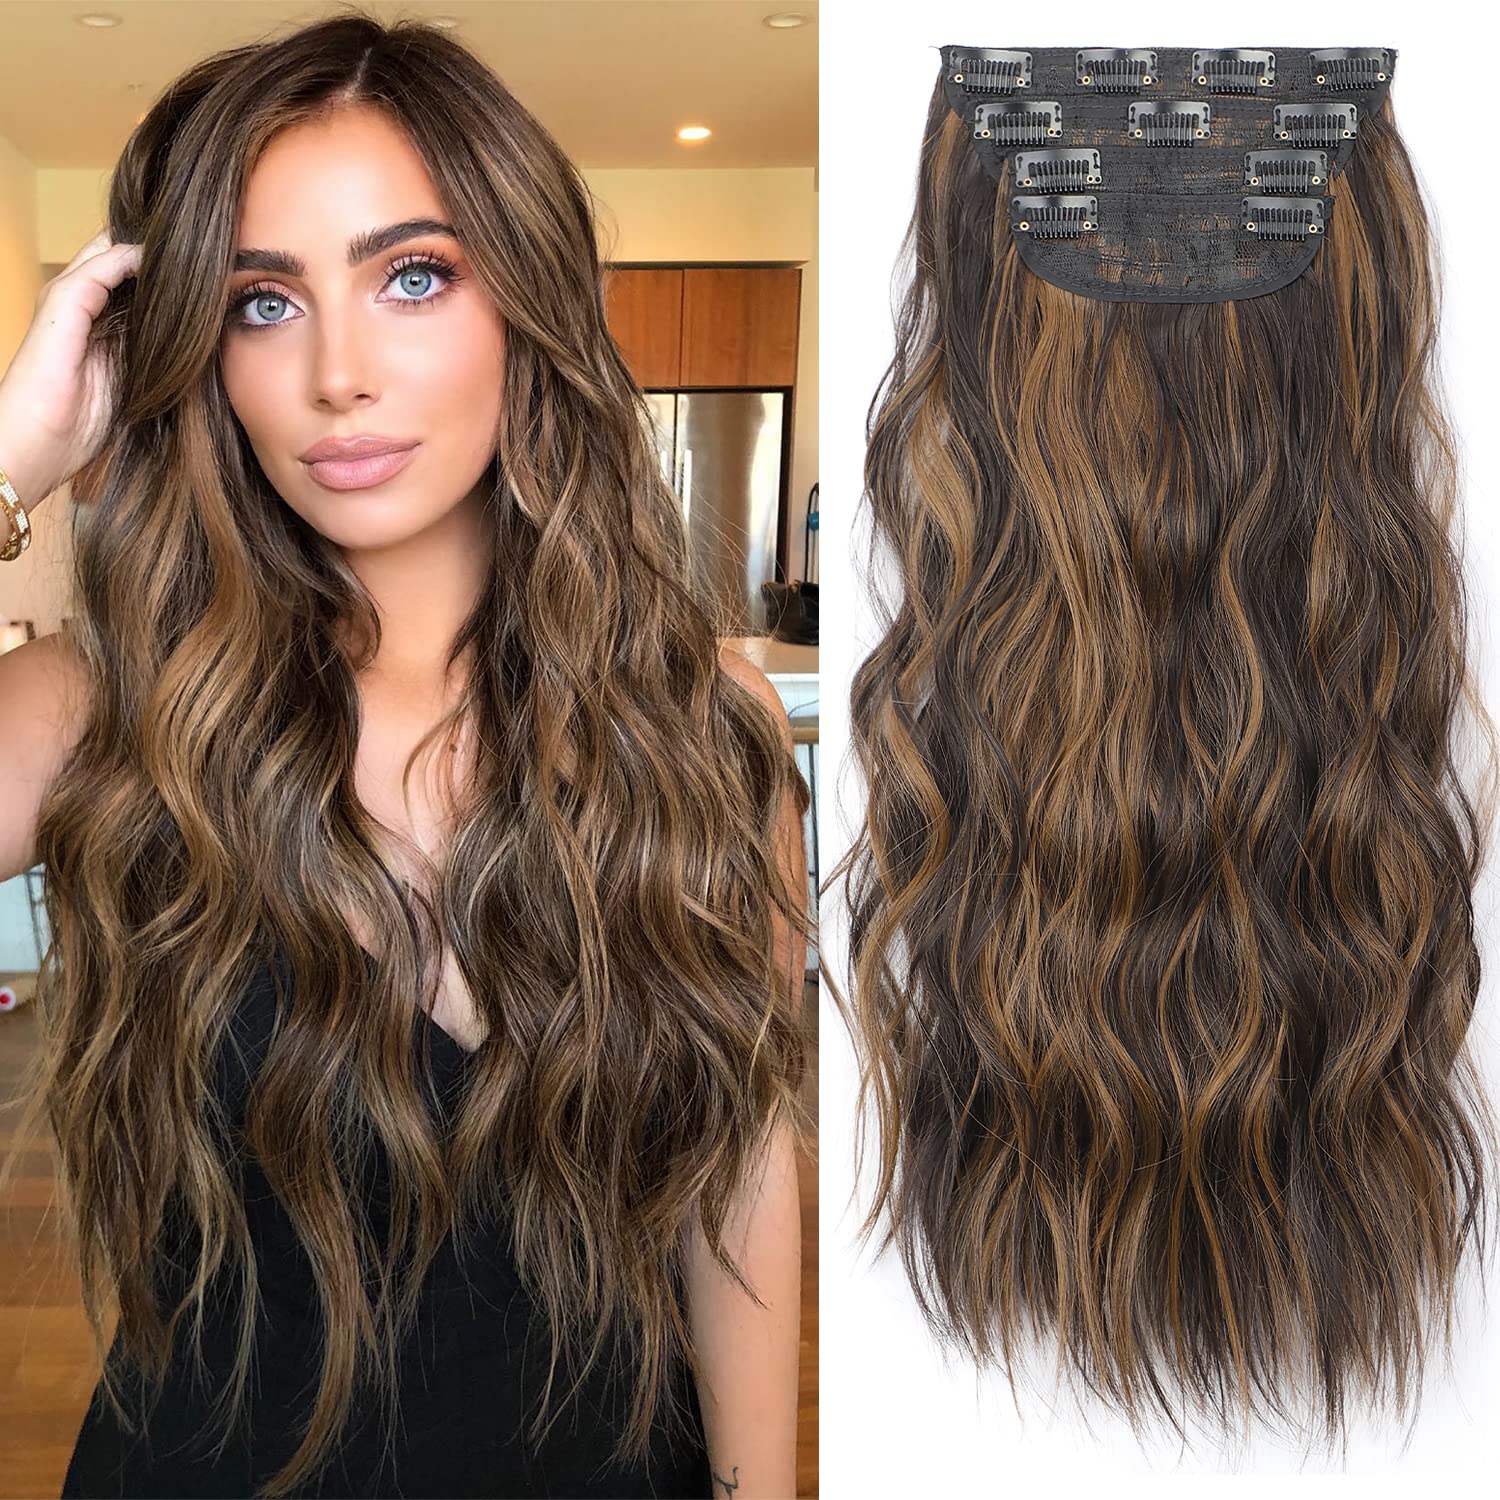 Clip in Long Wavy Synthetic Hair Extension 20 Inch 4PCS Balayage Dark Brown to Chestnut Hairpieces Fiber Thick Double Weft Hair Extension for Women